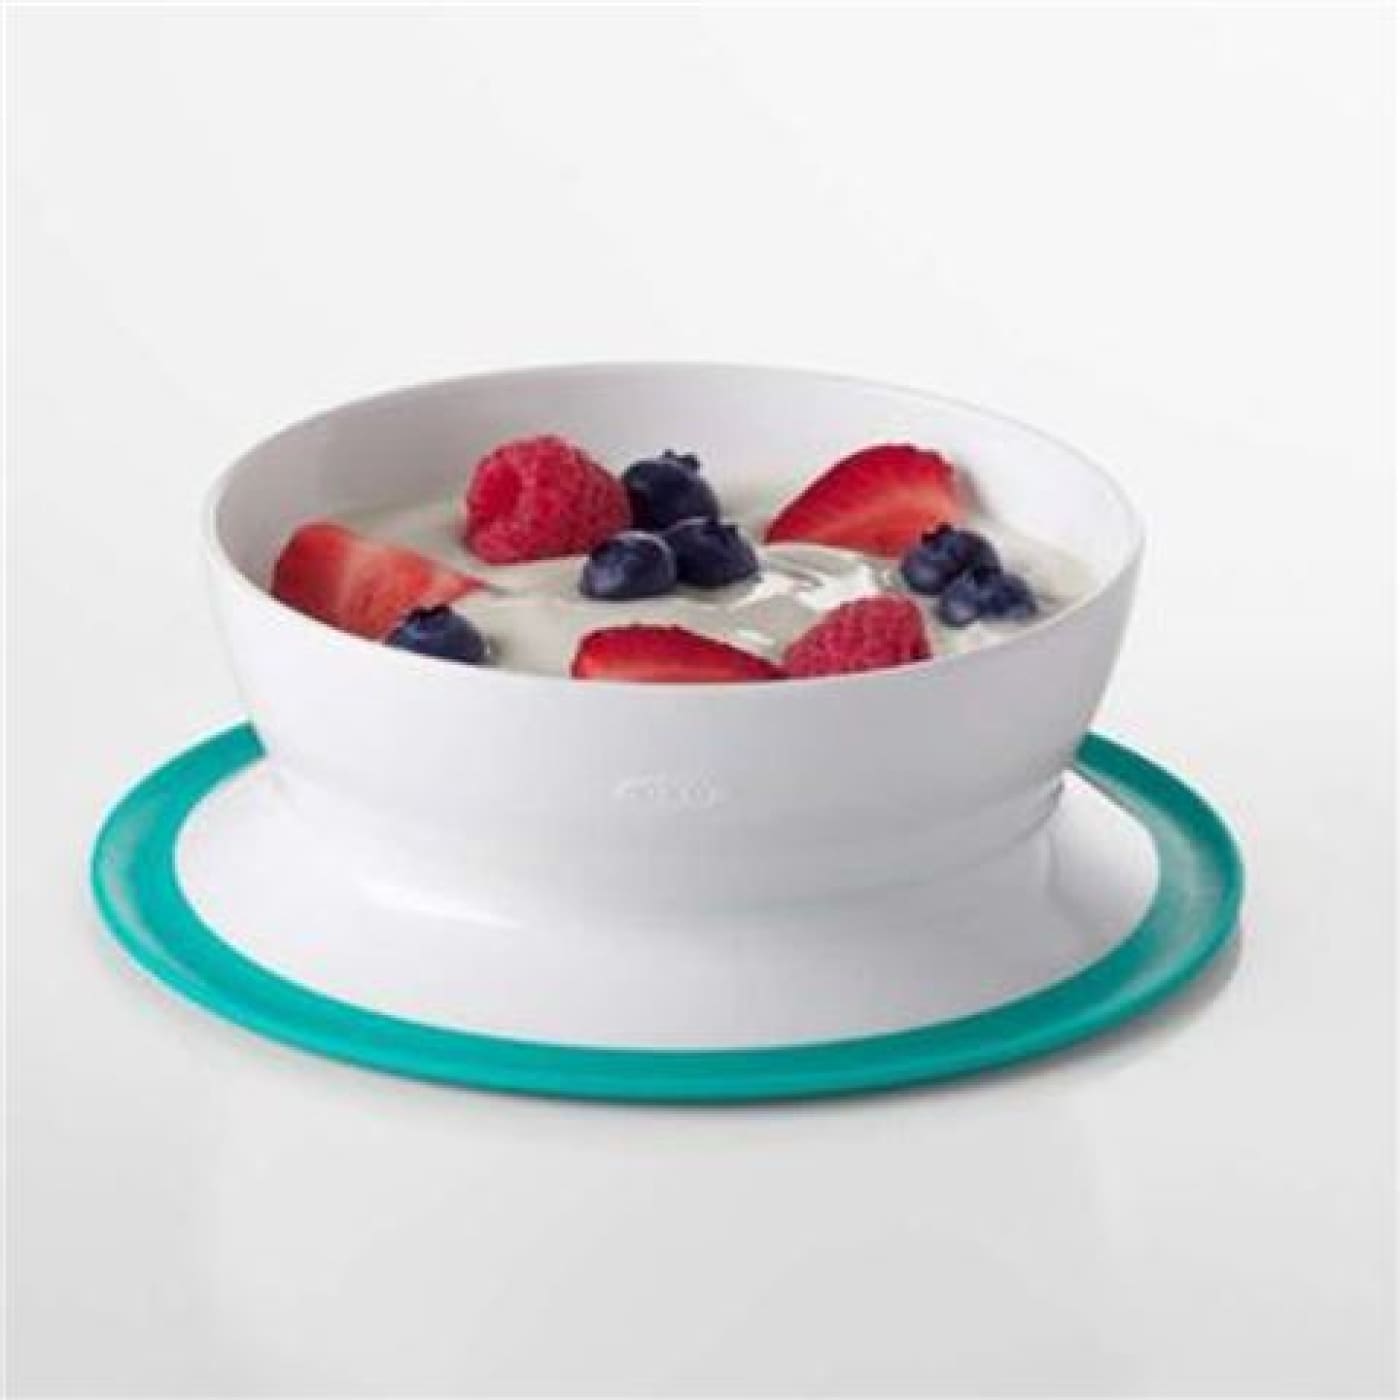 Oxo Tot Stick & Stay Suction Bowl - Teal - Teal - NURSING & FEEDING - CUTLERY/PLATES/BOWLS/TOYS